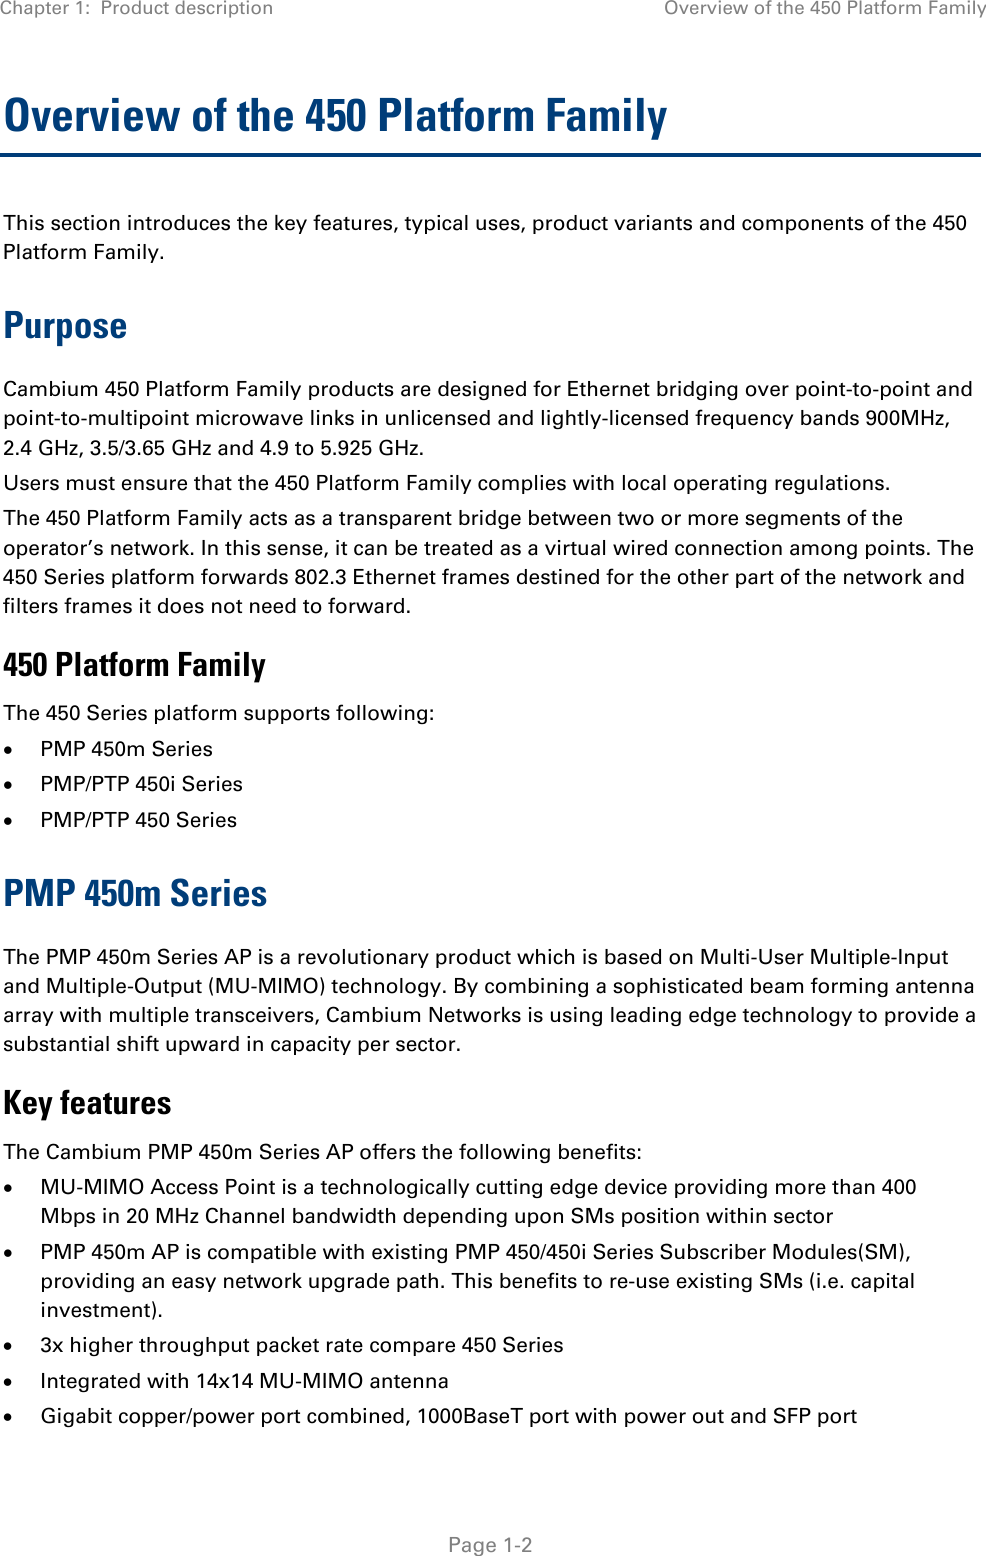 Chapter 1:  Product description  Overview of the 450 Platform Family   Page 1-2 Overview of the 450 Platform Family  This section introduces the key features, typical uses, product variants and components of the 450 Platform Family. Purpose Cambium 450 Platform Family products are designed for Ethernet bridging over point-to-point and point-to-multipoint microwave links in unlicensed and lightly-licensed frequency bands 900MHz, 2.4 GHz, 3.5/3.65 GHz and 4.9 to 5.925 GHz. Users must ensure that the 450 Platform Family complies with local operating regulations. The 450 Platform Family acts as a transparent bridge between two or more segments of the operator’s network. In this sense, it can be treated as a virtual wired connection among points. The 450 Series platform forwards 802.3 Ethernet frames destined for the other part of the network and filters frames it does not need to forward.  450 Platform Family The 450 Series platform supports following:  PMP 450m Series  PMP/PTP 450i Series   PMP/PTP 450 Series PMP 450m Series The PMP 450m Series AP is a revolutionary product which is based on Multi-User Multiple-Input and Multiple-Output (MU-MIMO) technology. By combining a sophisticated beam forming antenna array with multiple transceivers, Cambium Networks is using leading edge technology to provide a substantial shift upward in capacity per sector. Key features The Cambium PMP 450m Series AP offers the following benefits:  MU-MIMO Access Point is a technologically cutting edge device providing more than 400 Mbps in 20 MHz Channel bandwidth depending upon SMs position within sector  PMP 450m AP is compatible with existing PMP 450/450i Series Subscriber Modules(SM), providing an easy network upgrade path. This benefits to re-use existing SMs (i.e. capital investment).  3x higher throughput packet rate compare 450 Series  Integrated with 14x14 MU-MIMO antenna  Gigabit copper/power port combined, 1000BaseT port with power out and SFP port 